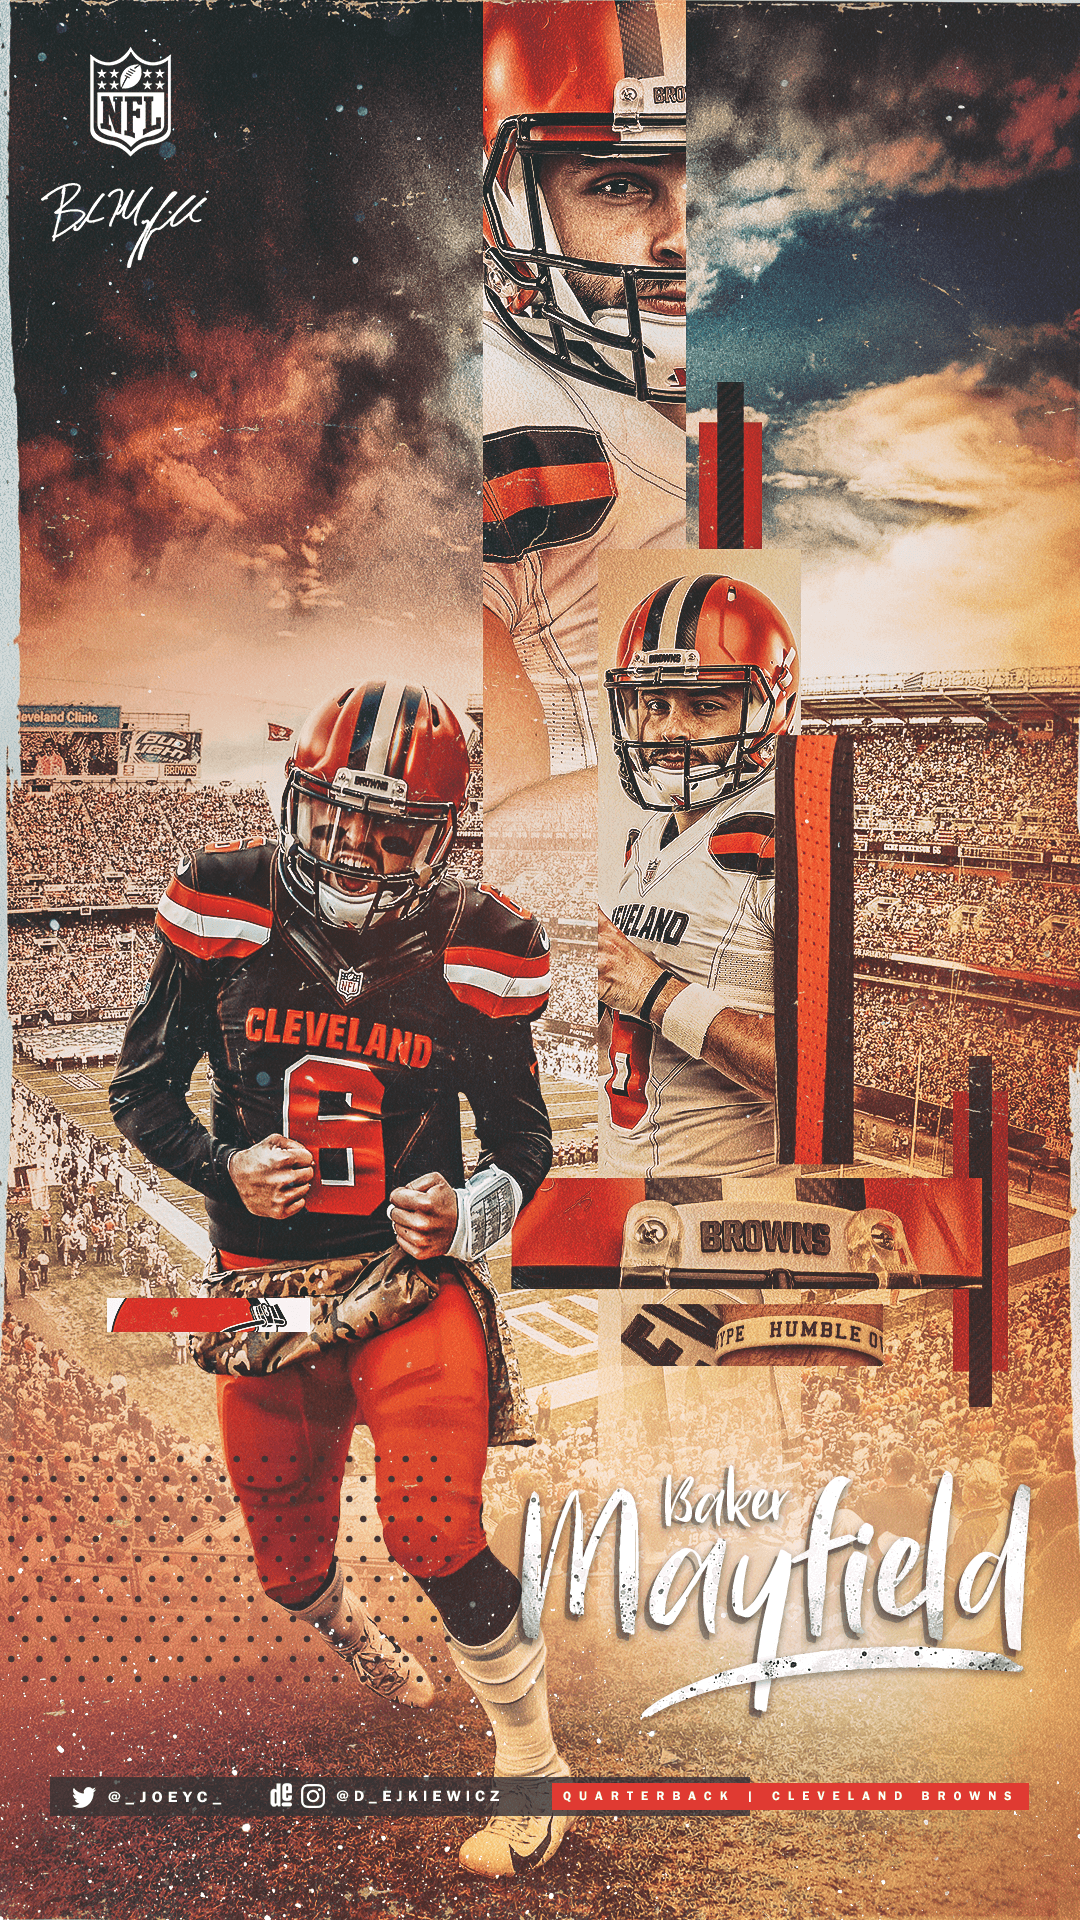 Baker Wallpaper just in time for the Holidays